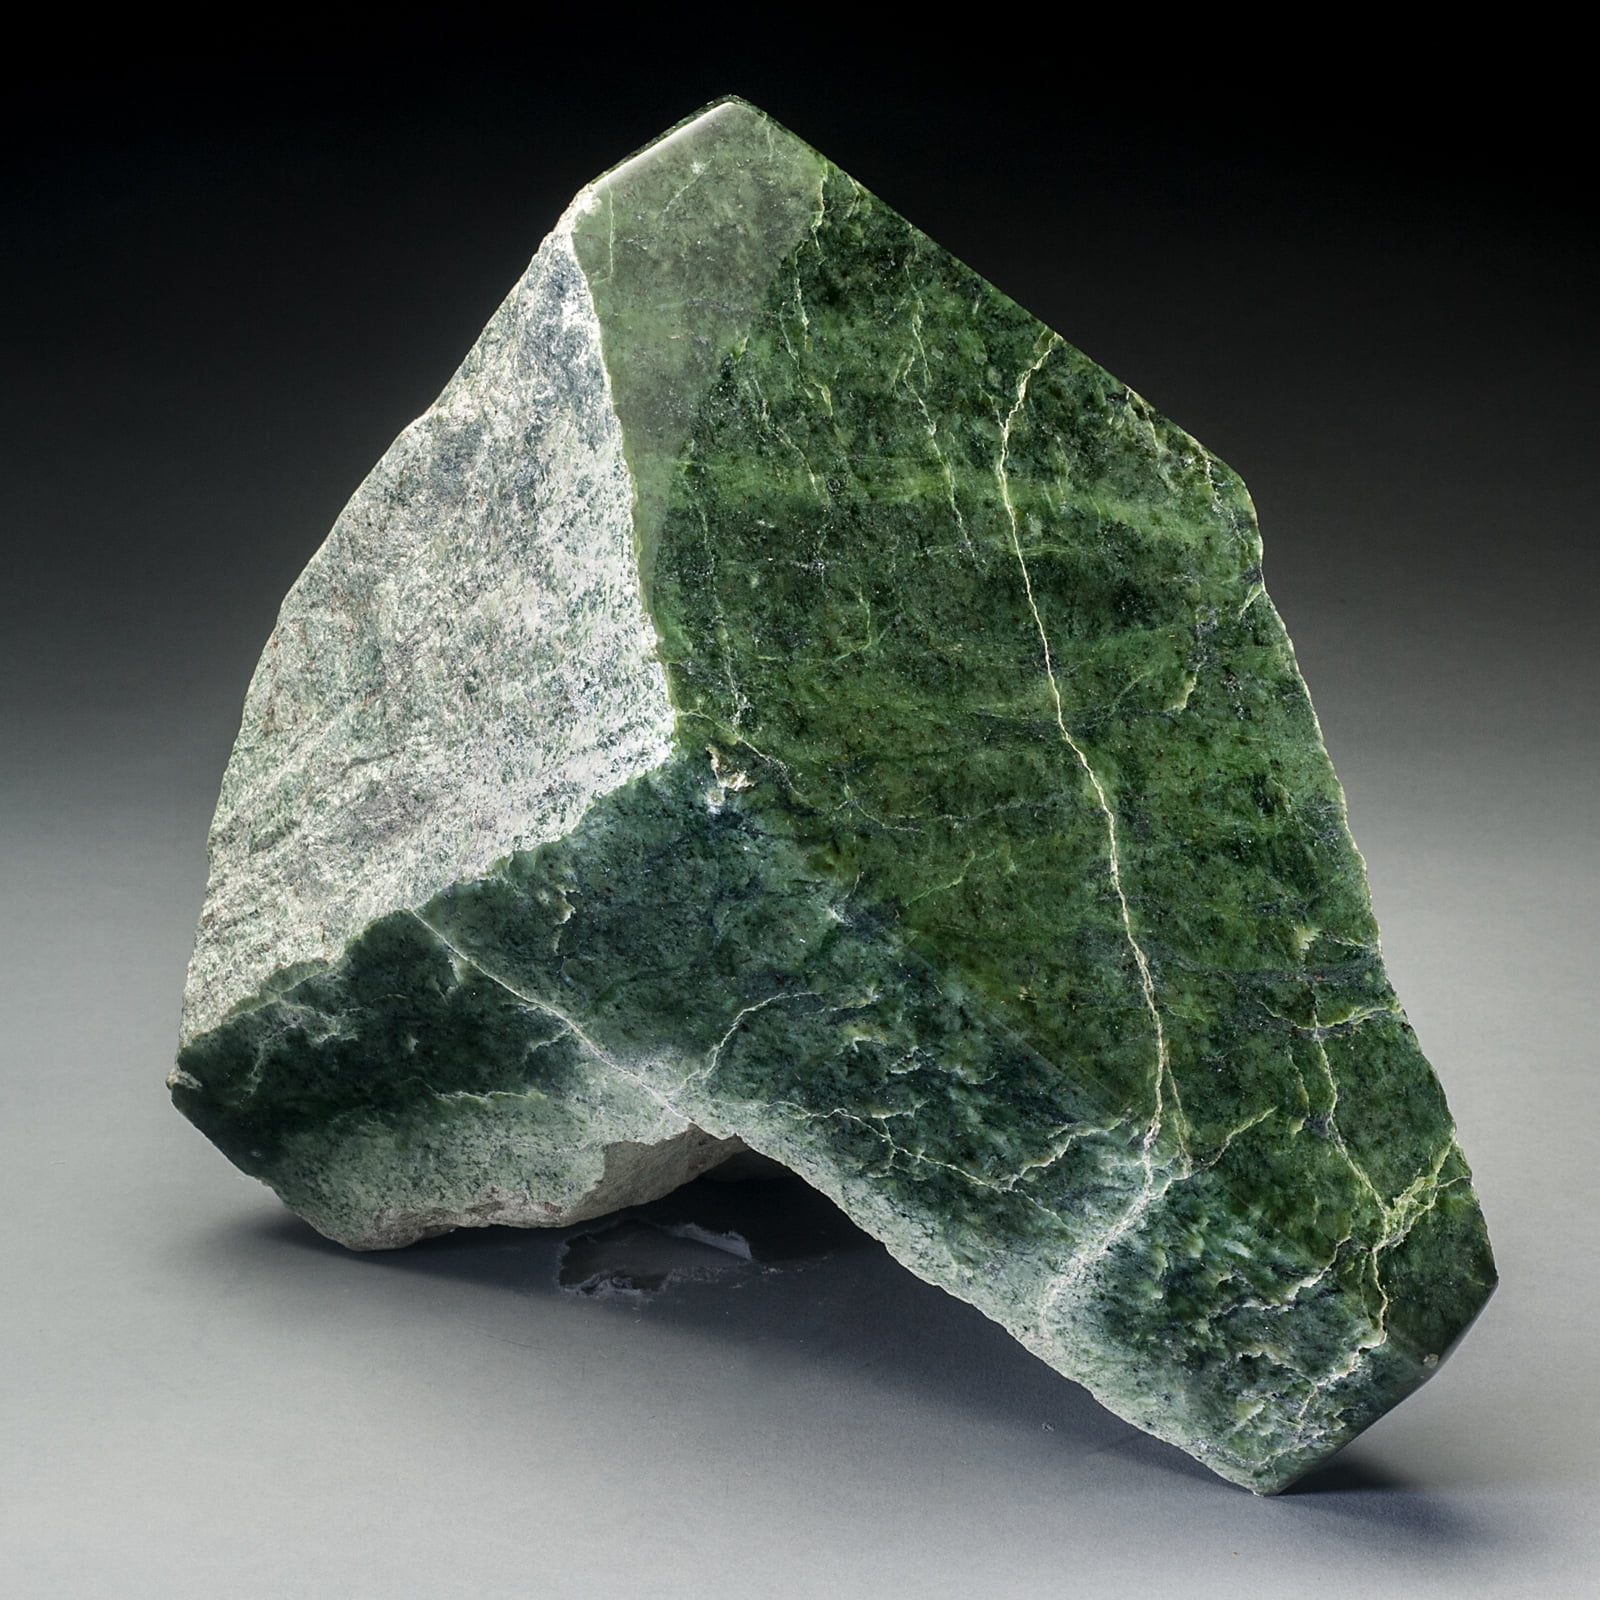 #J1 Dragon’s Claw Sculpture of Rare Wyoming Jade